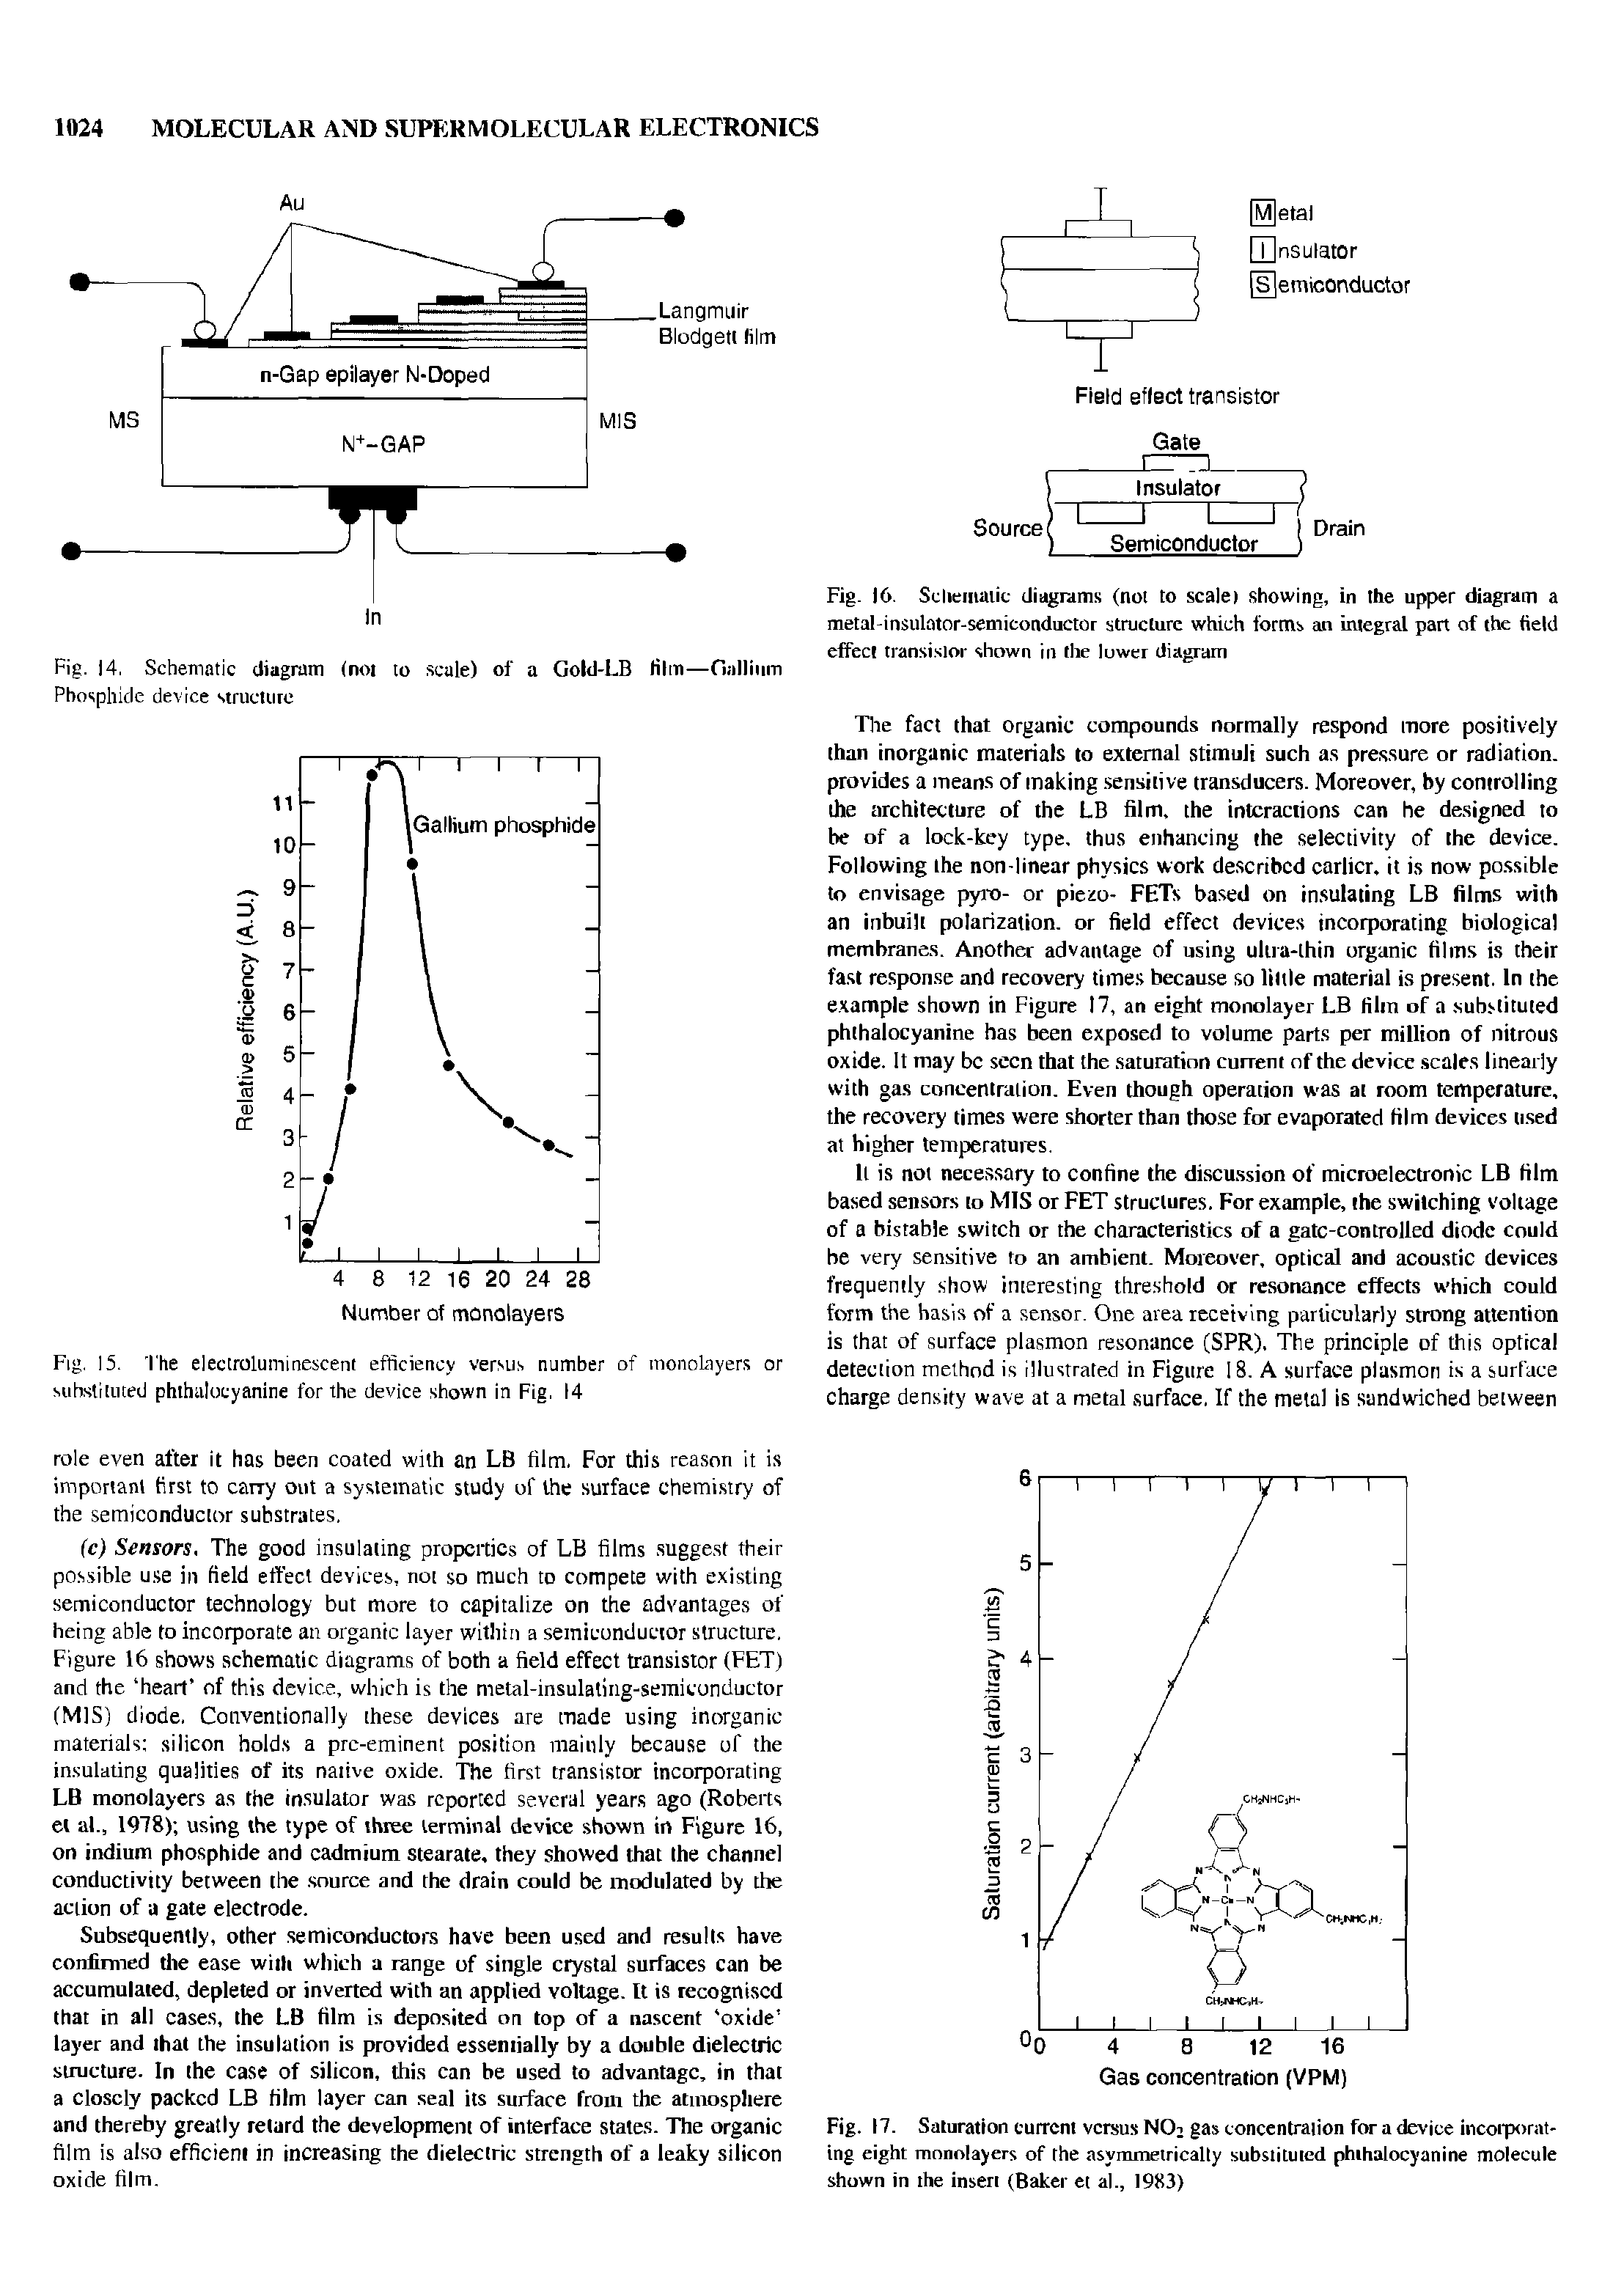 Fig. 15. The electroluminescent efficiency versus number of monolayers or substituted phthalocyanine for the device shown in Fig, 14...